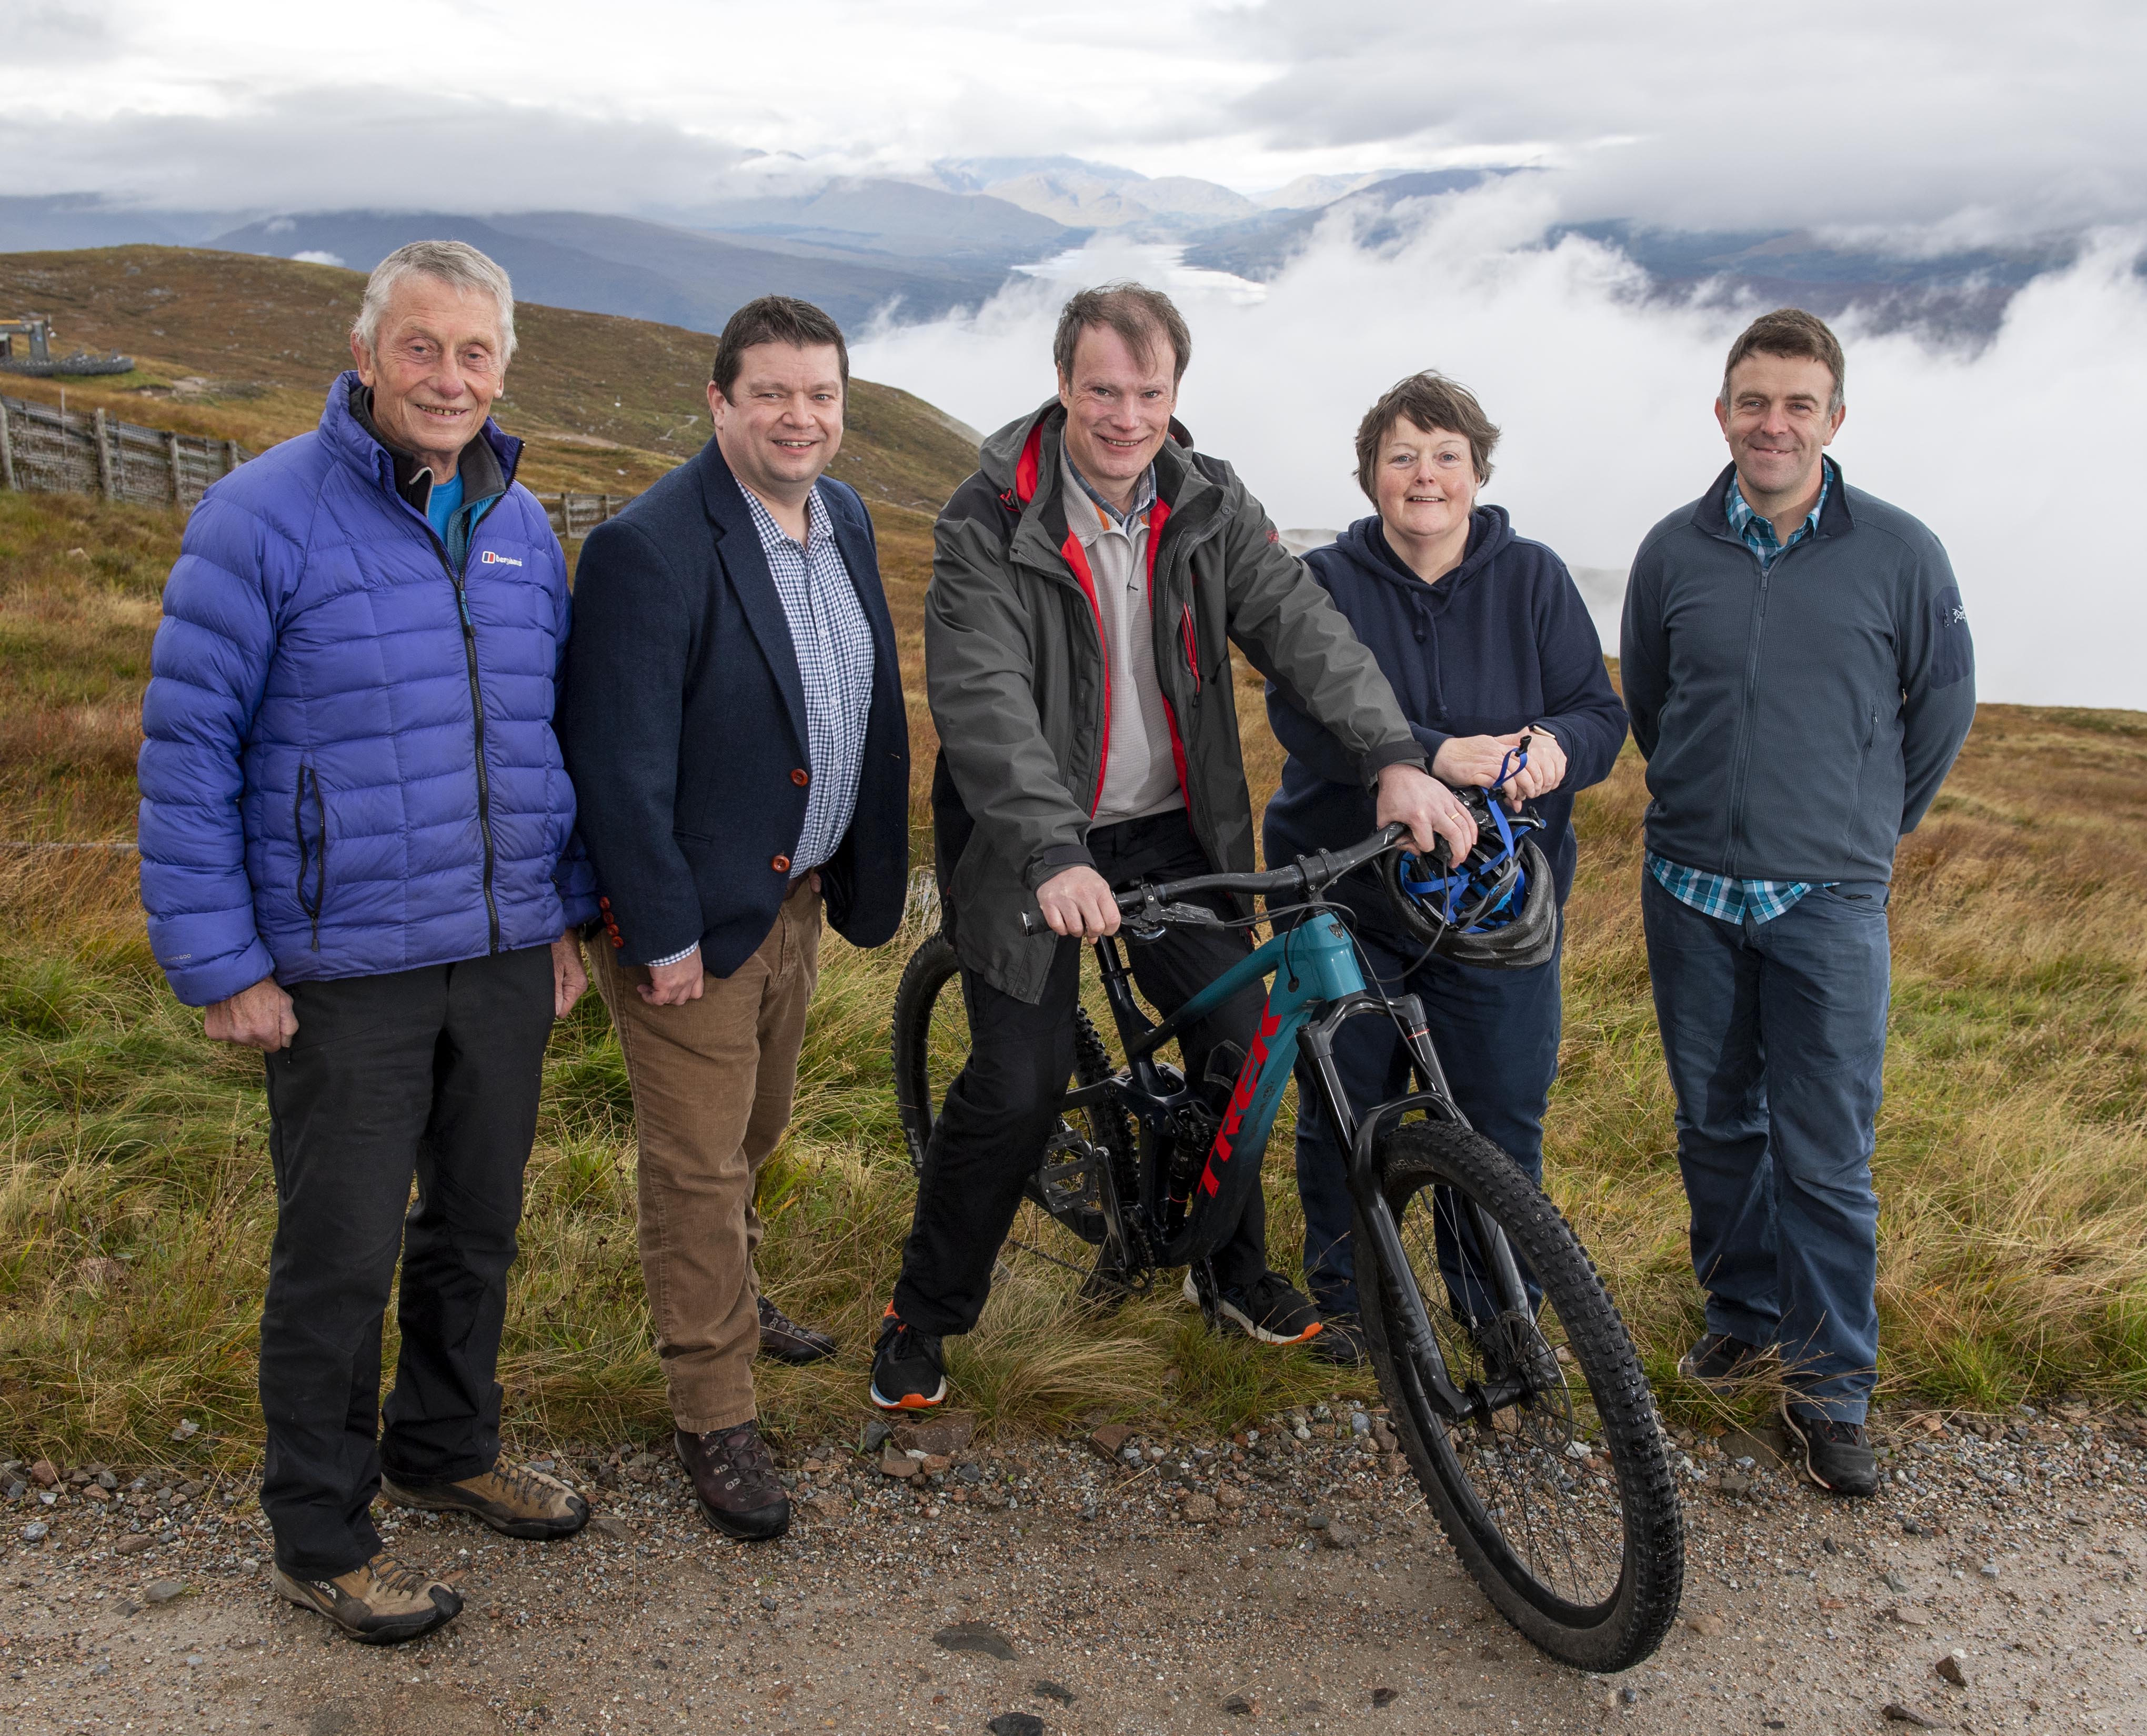 Lochaber mountain resort secures £800,000 from HIE